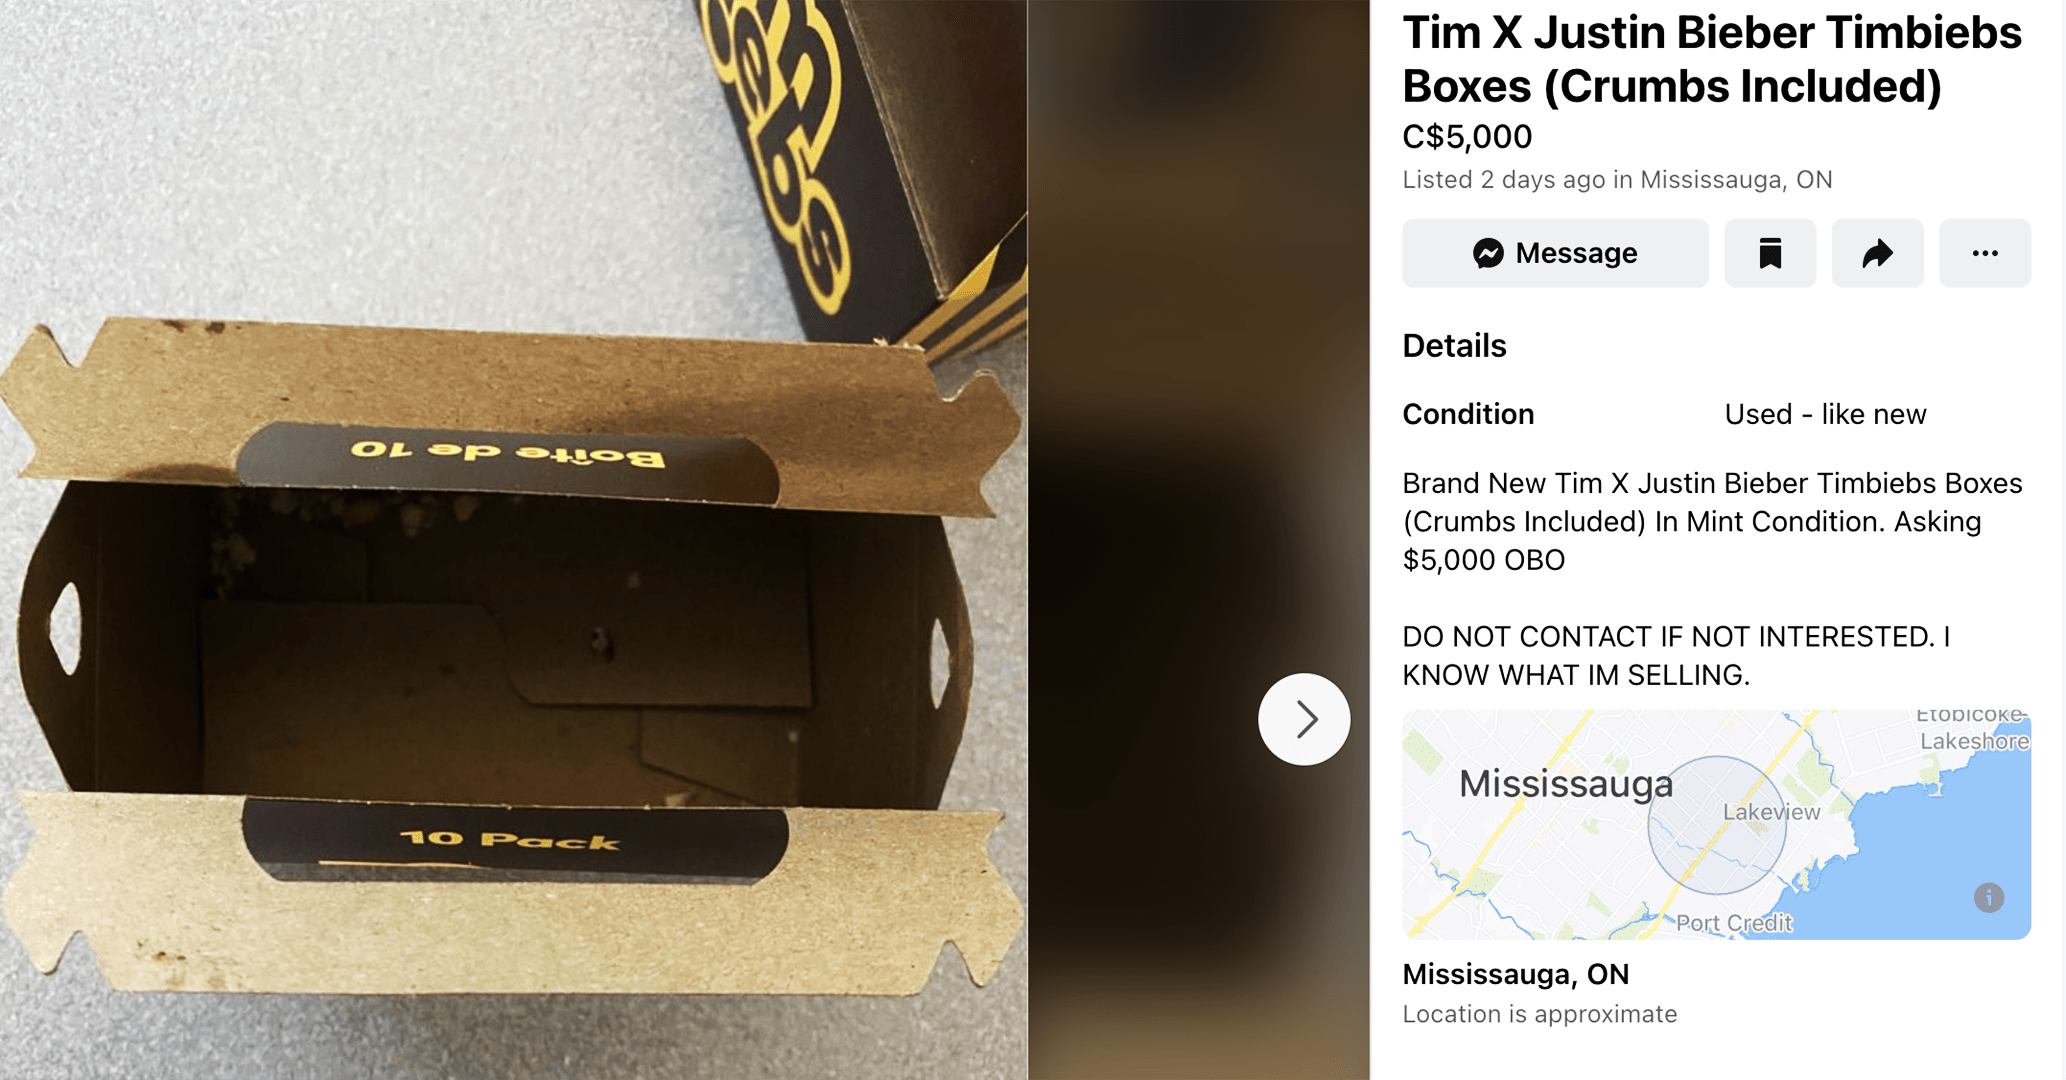 A Facebook Marketplace posting selling TimBiebs boxes for 5 thousand dollars.